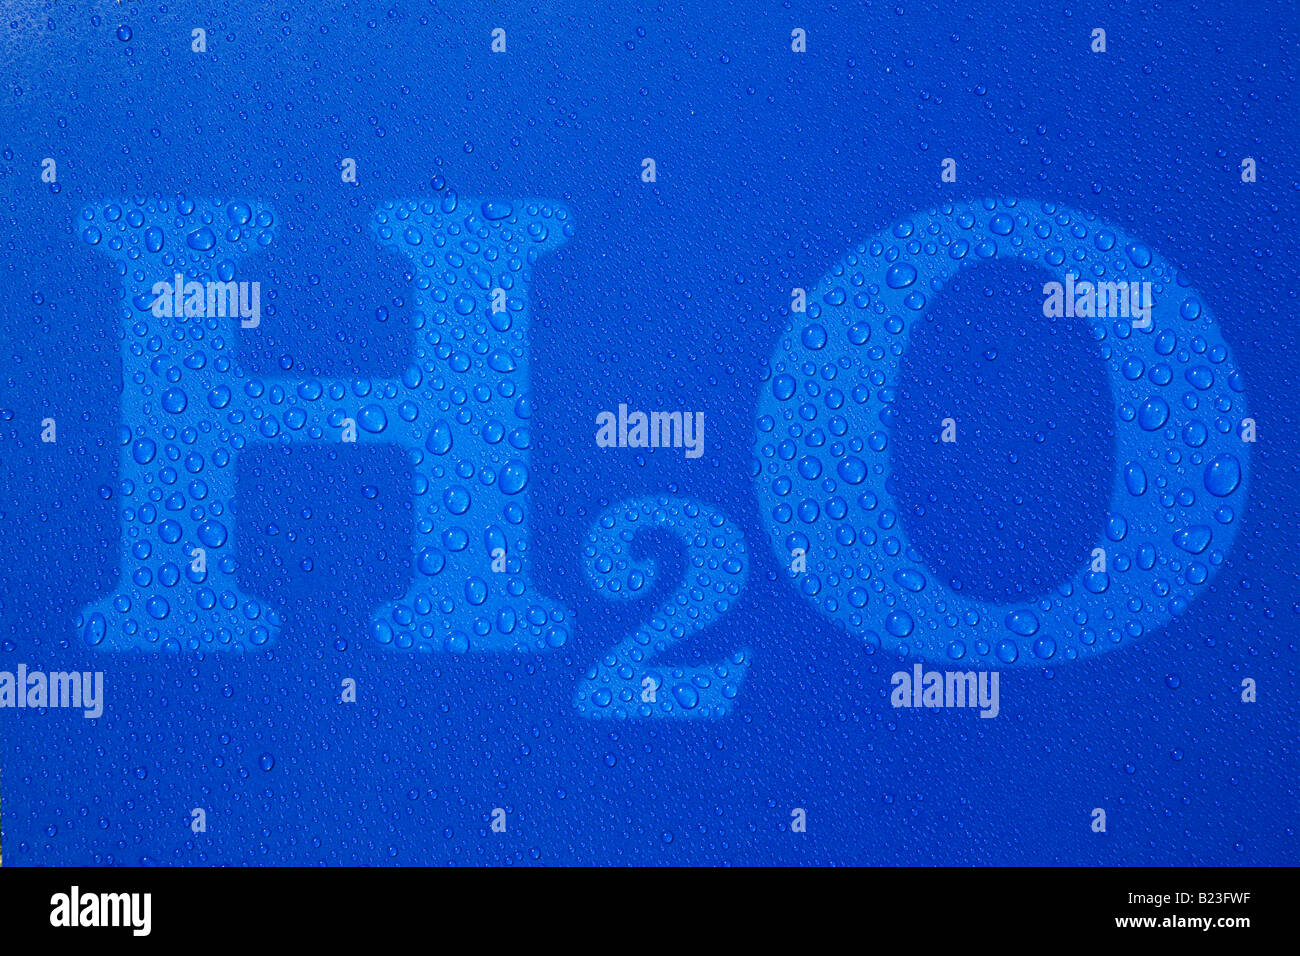 H2O text symbol water droplets on blue background Stock Photo